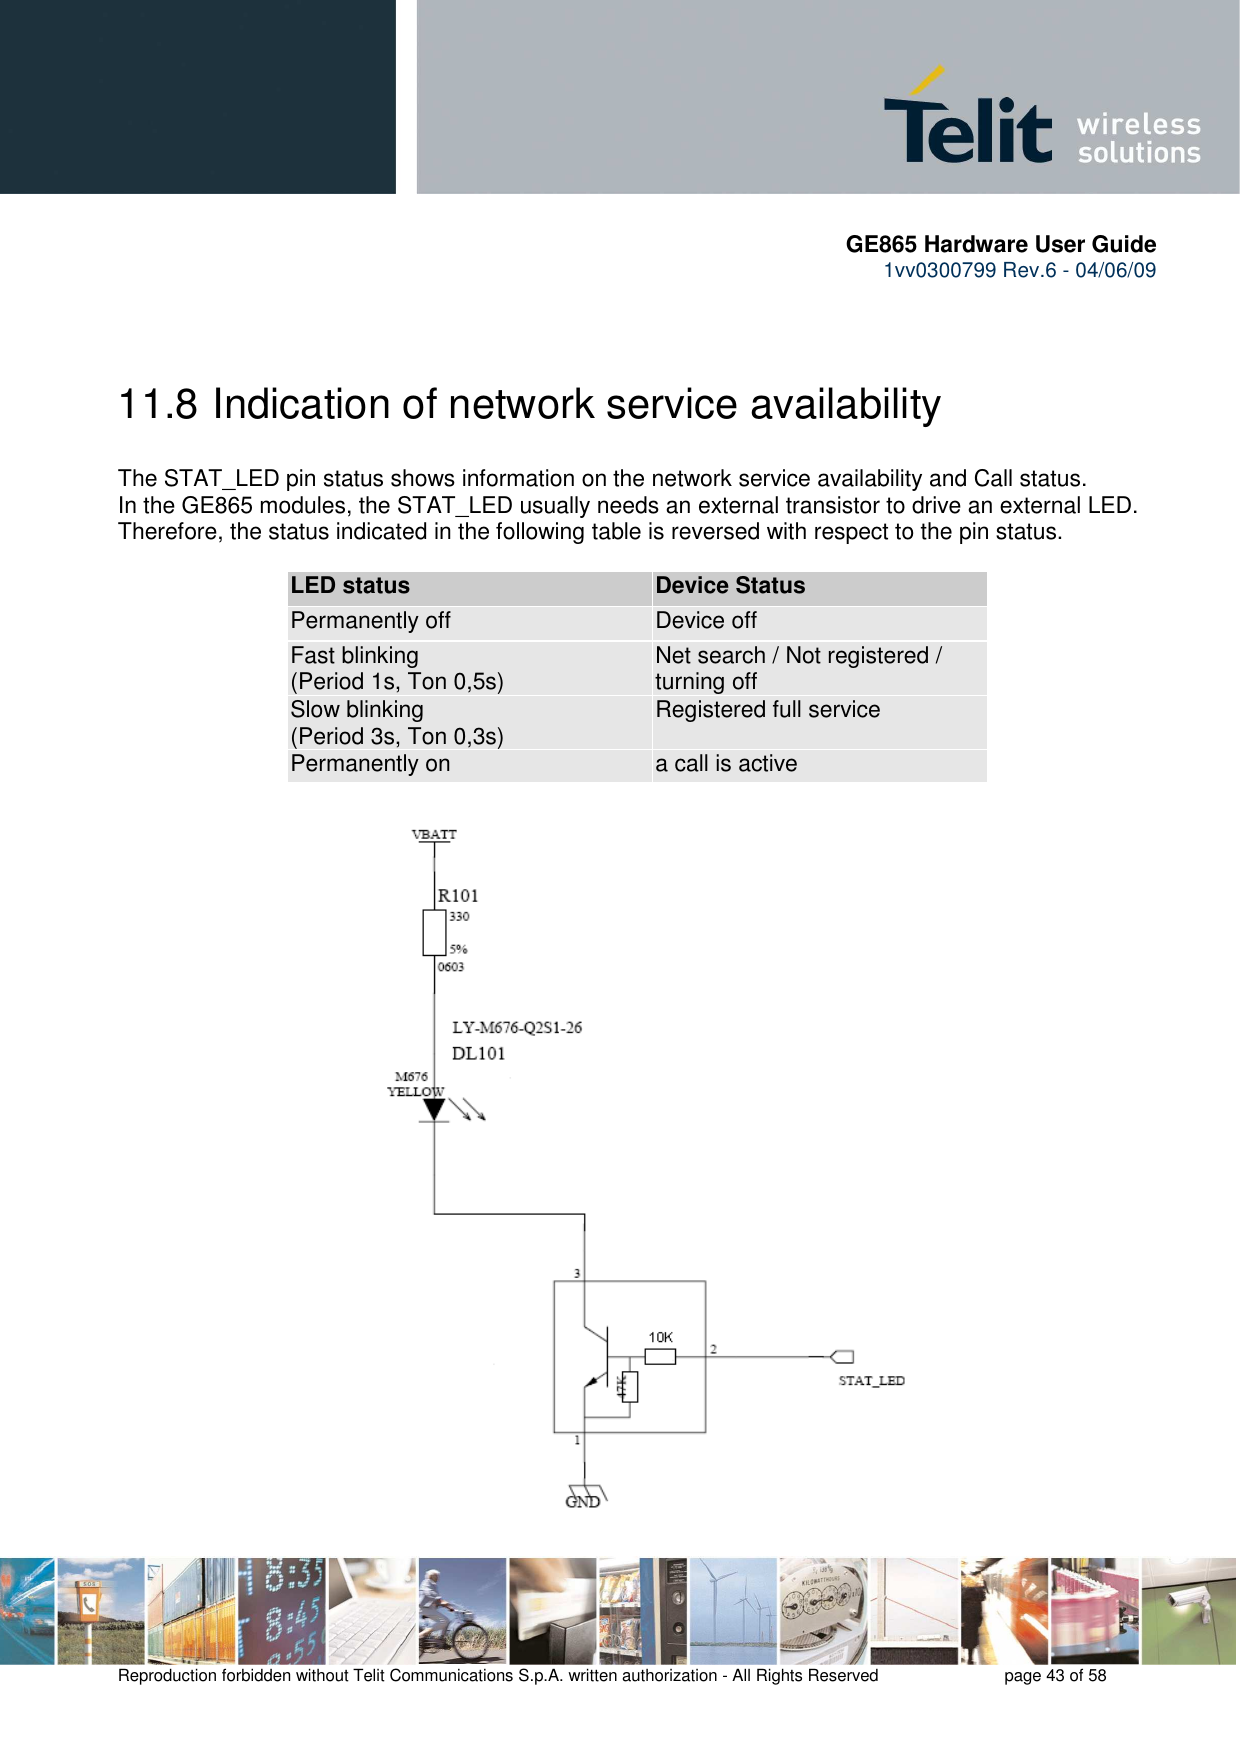       GE865 Hardware User Guide 1vv0300799 Rev.6 - 04/06/09      Reproduction forbidden without Telit Communications S.p.A. written authorization - All Rights Reserved    page 43 of 58   11.8  Indication of network service availability The STAT_LED pin status shows information on the network service availability and Call status.  In the GE865 modules, the STAT_LED usually needs an external transistor to drive an external LED. Therefore, the status indicated in the following table is reversed with respect to the pin status.             LED status Device Status Permanently off  Device off Fast blinking  (Period 1s, Ton 0,5s)  Net search / Not registered / turning off Slow blinking (Period 3s, Ton 0,3s)  Registered full service Permanently on  a call is active        